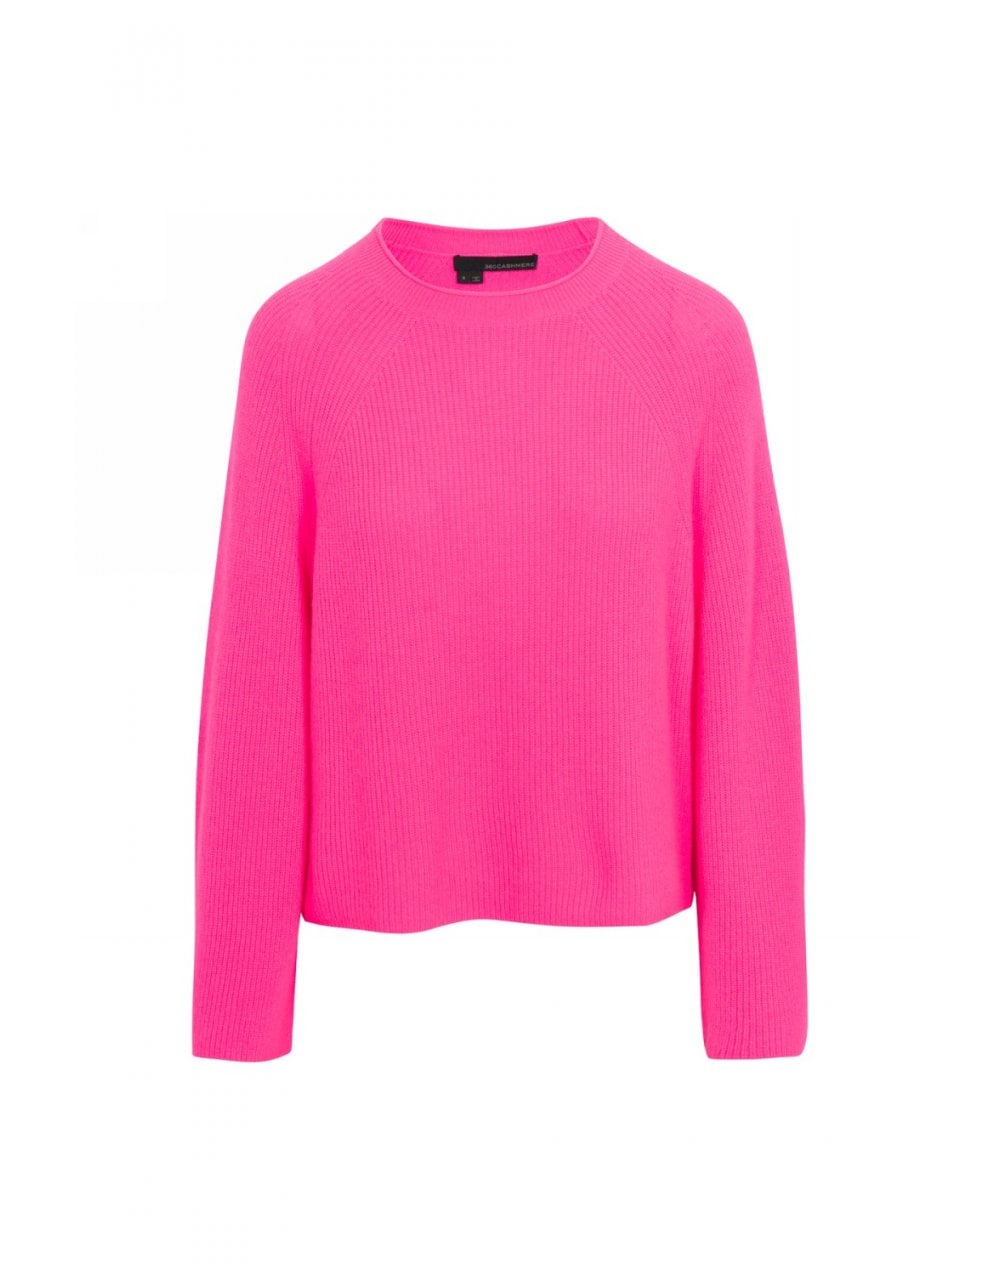 360-cashmere-sophie-trapeze-crew-neck-jumper-col-dayglo-pink